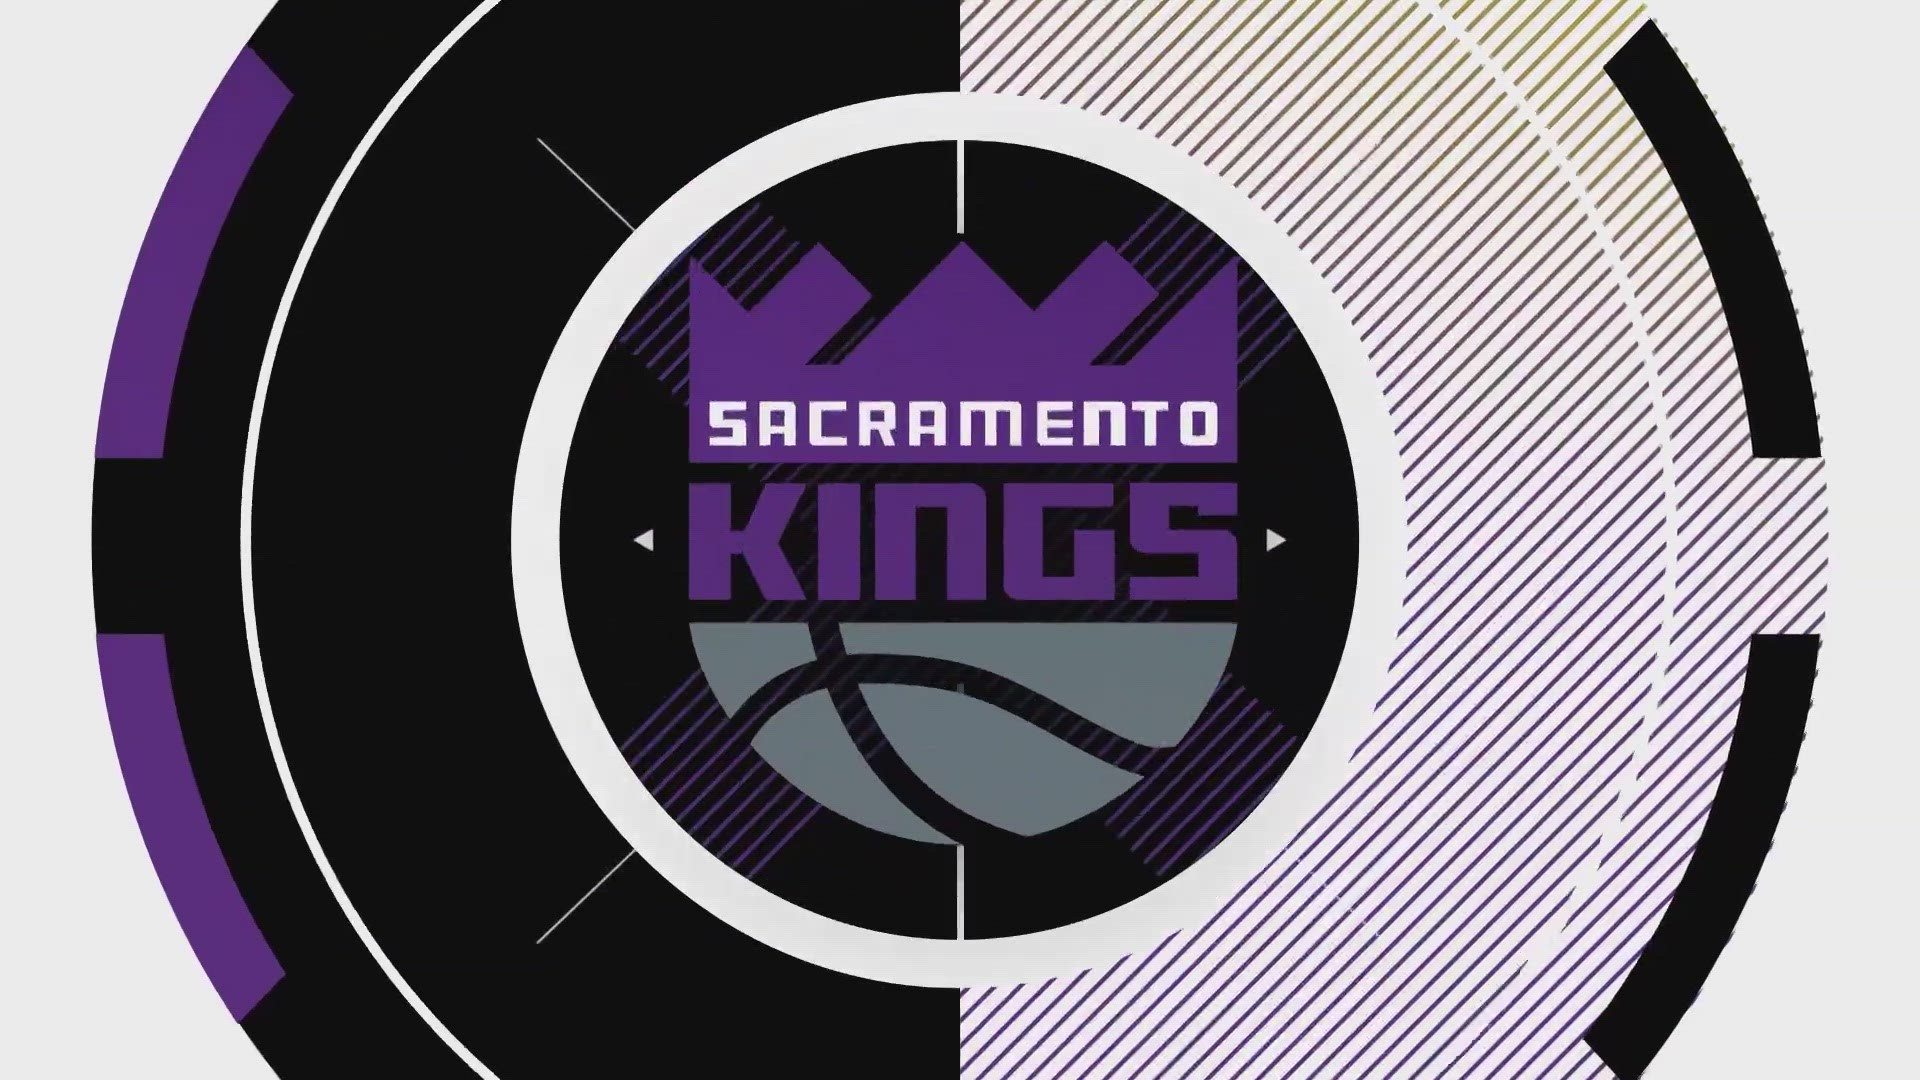 The Sacramento Kings are on the verge of NBA history. A loss by the Timberwolves against the Warriors clinches a playoff berth for Sacramento.